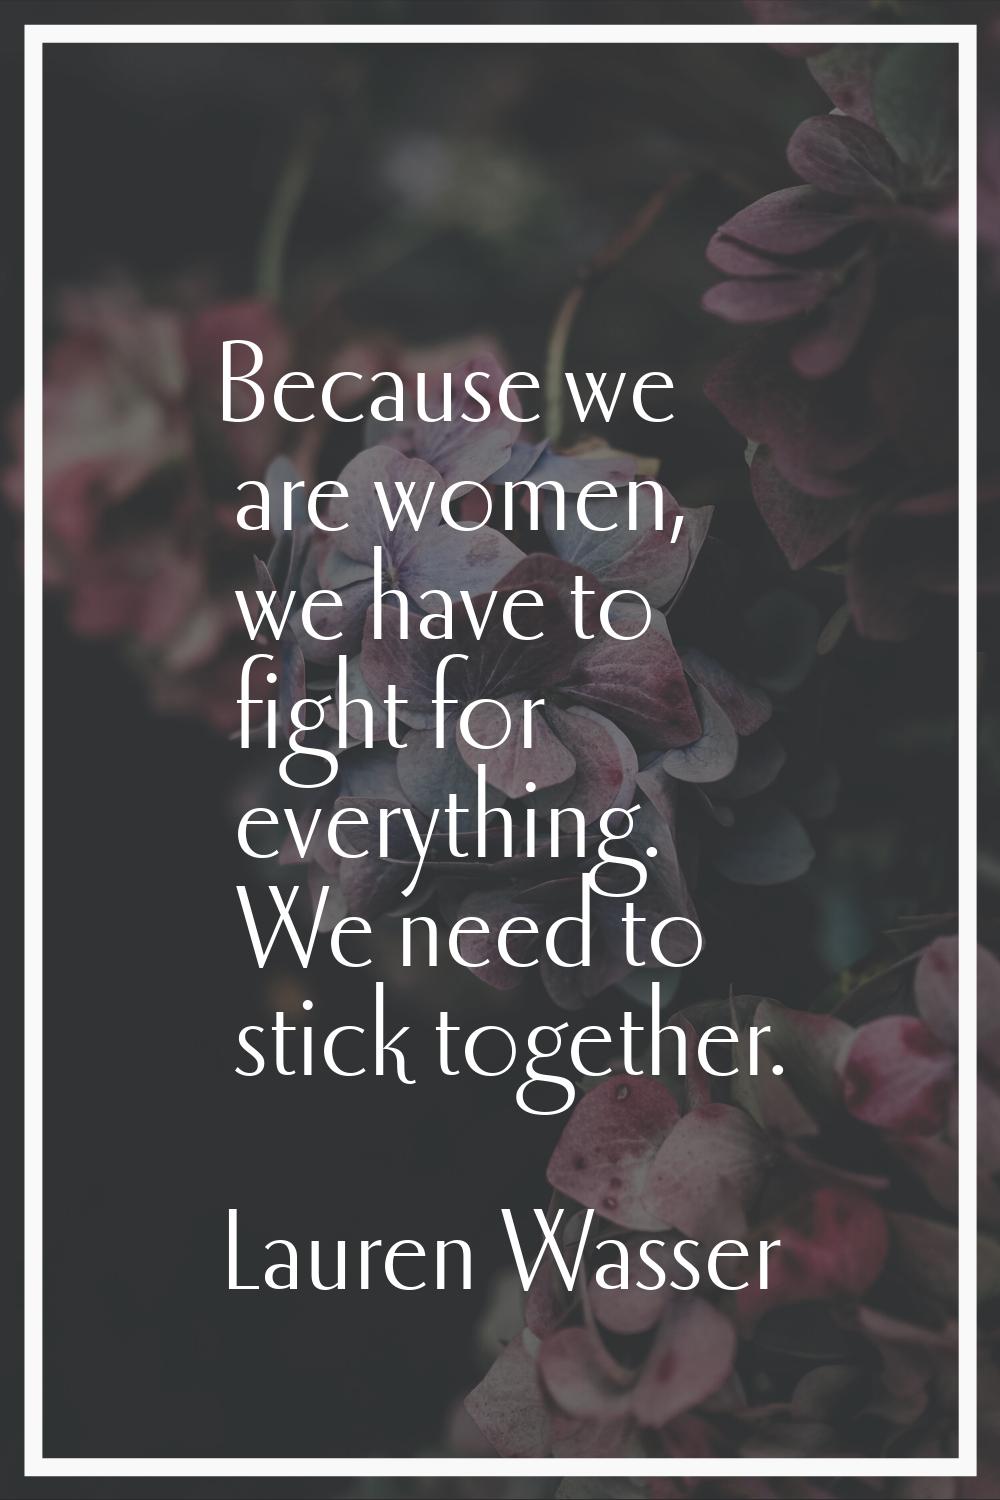 Because we are women, we have to fight for everything. We need to stick together.